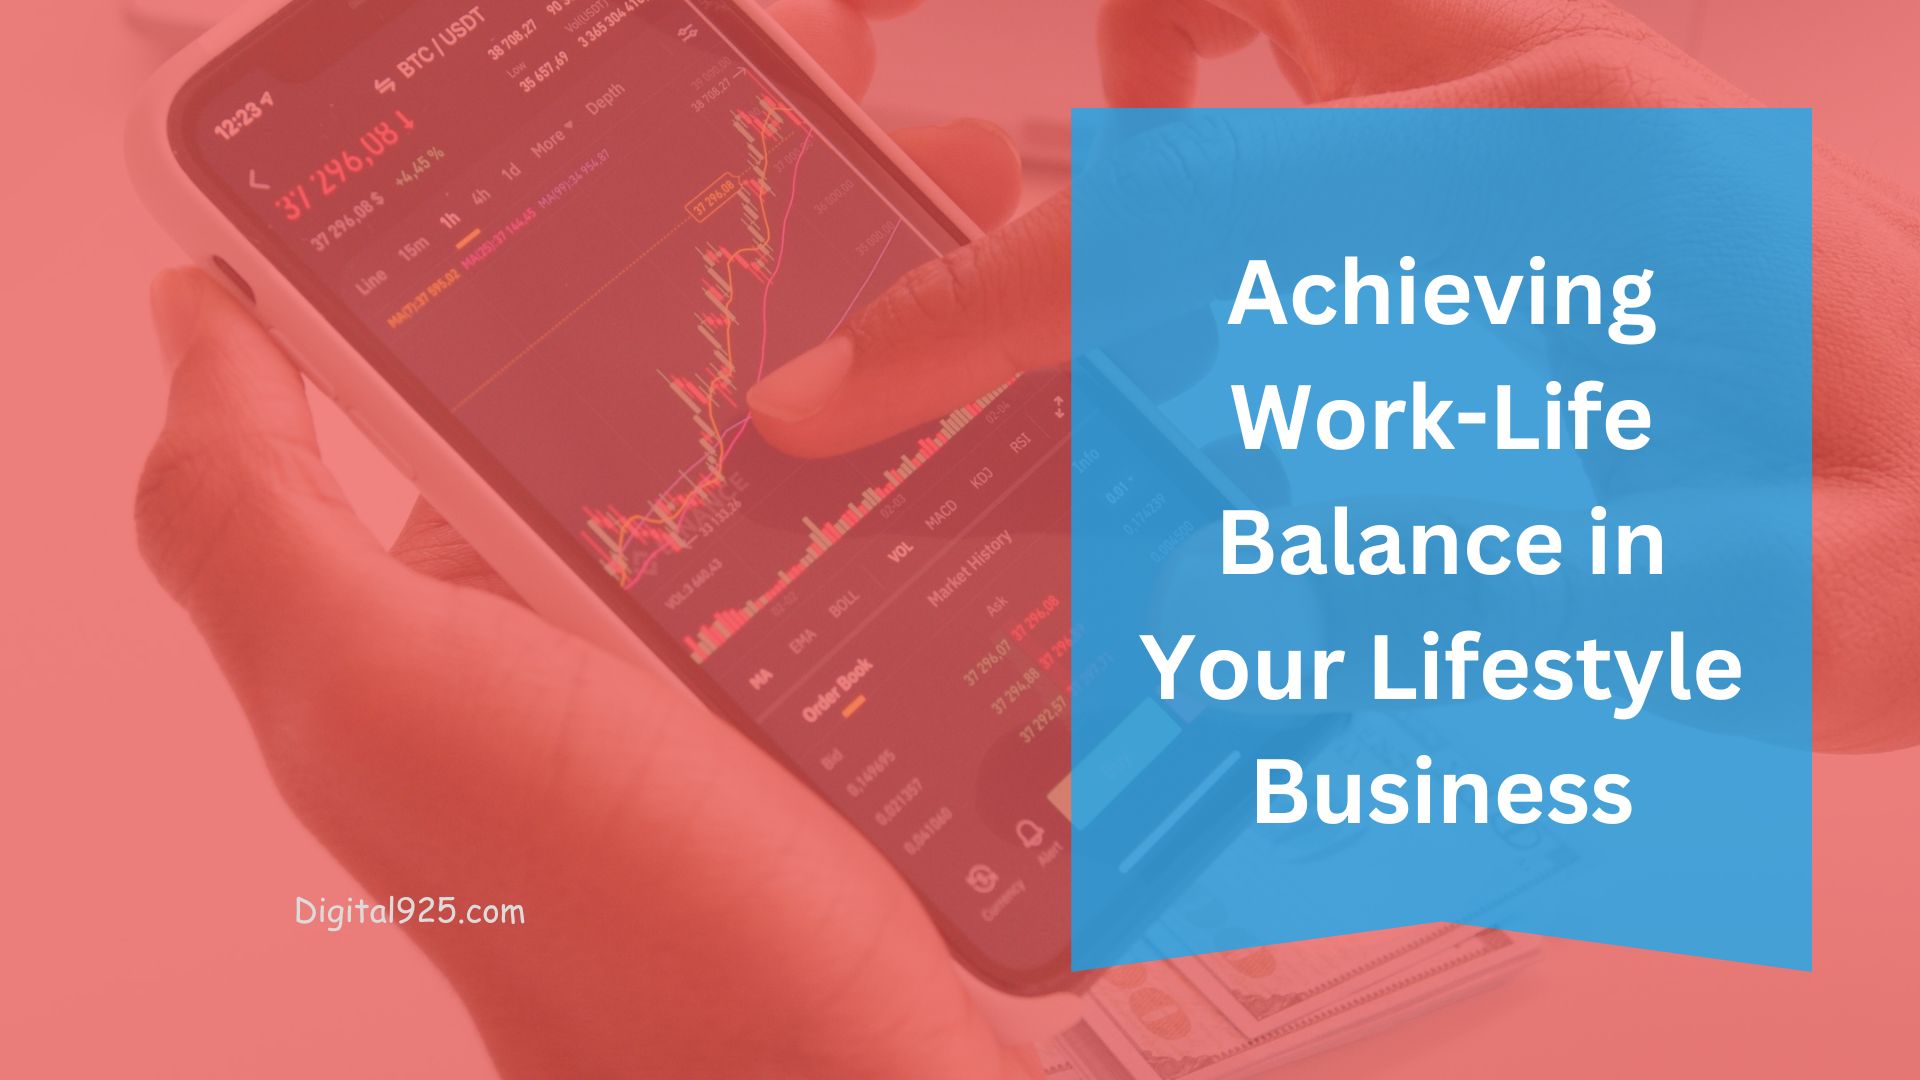 Achieving Work-Life Balance in Your Lifestyle Business